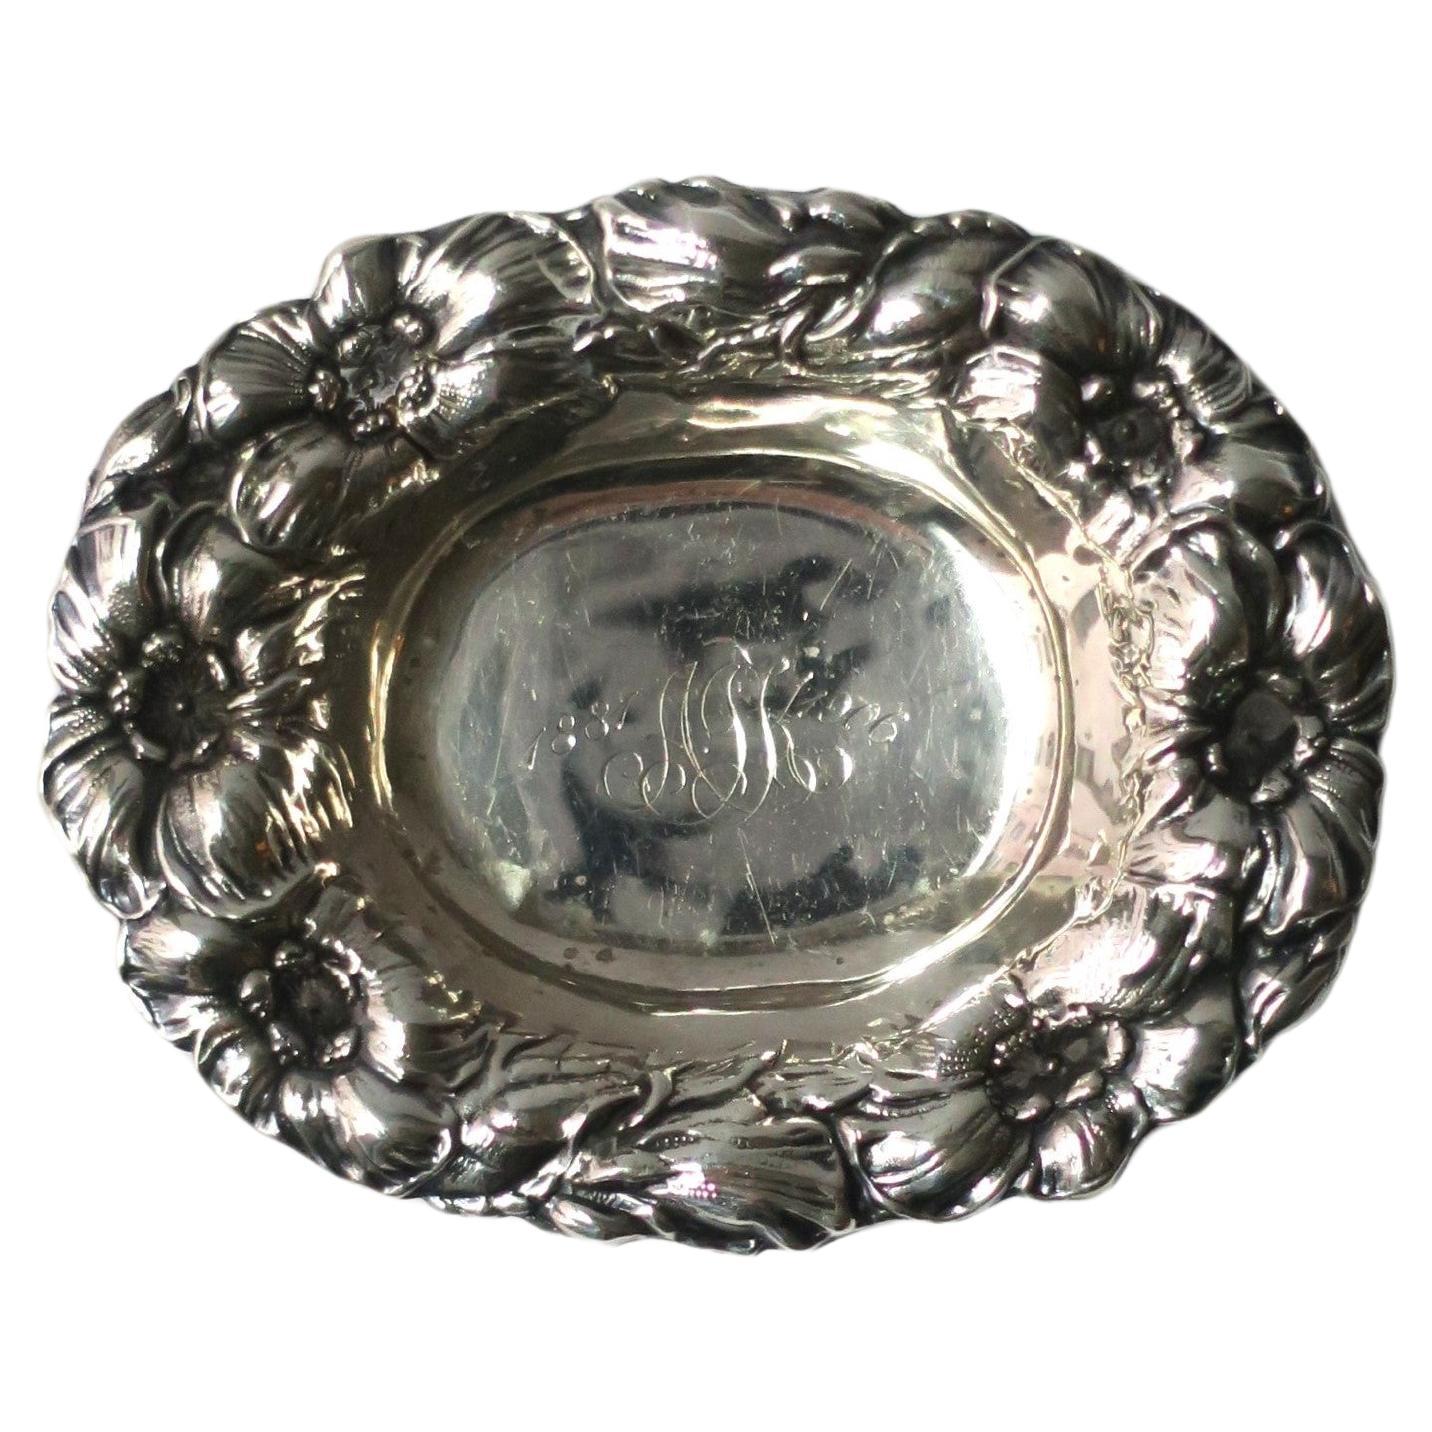 Antique Sterling Silver Jewelry Dish in the Buccellati Style